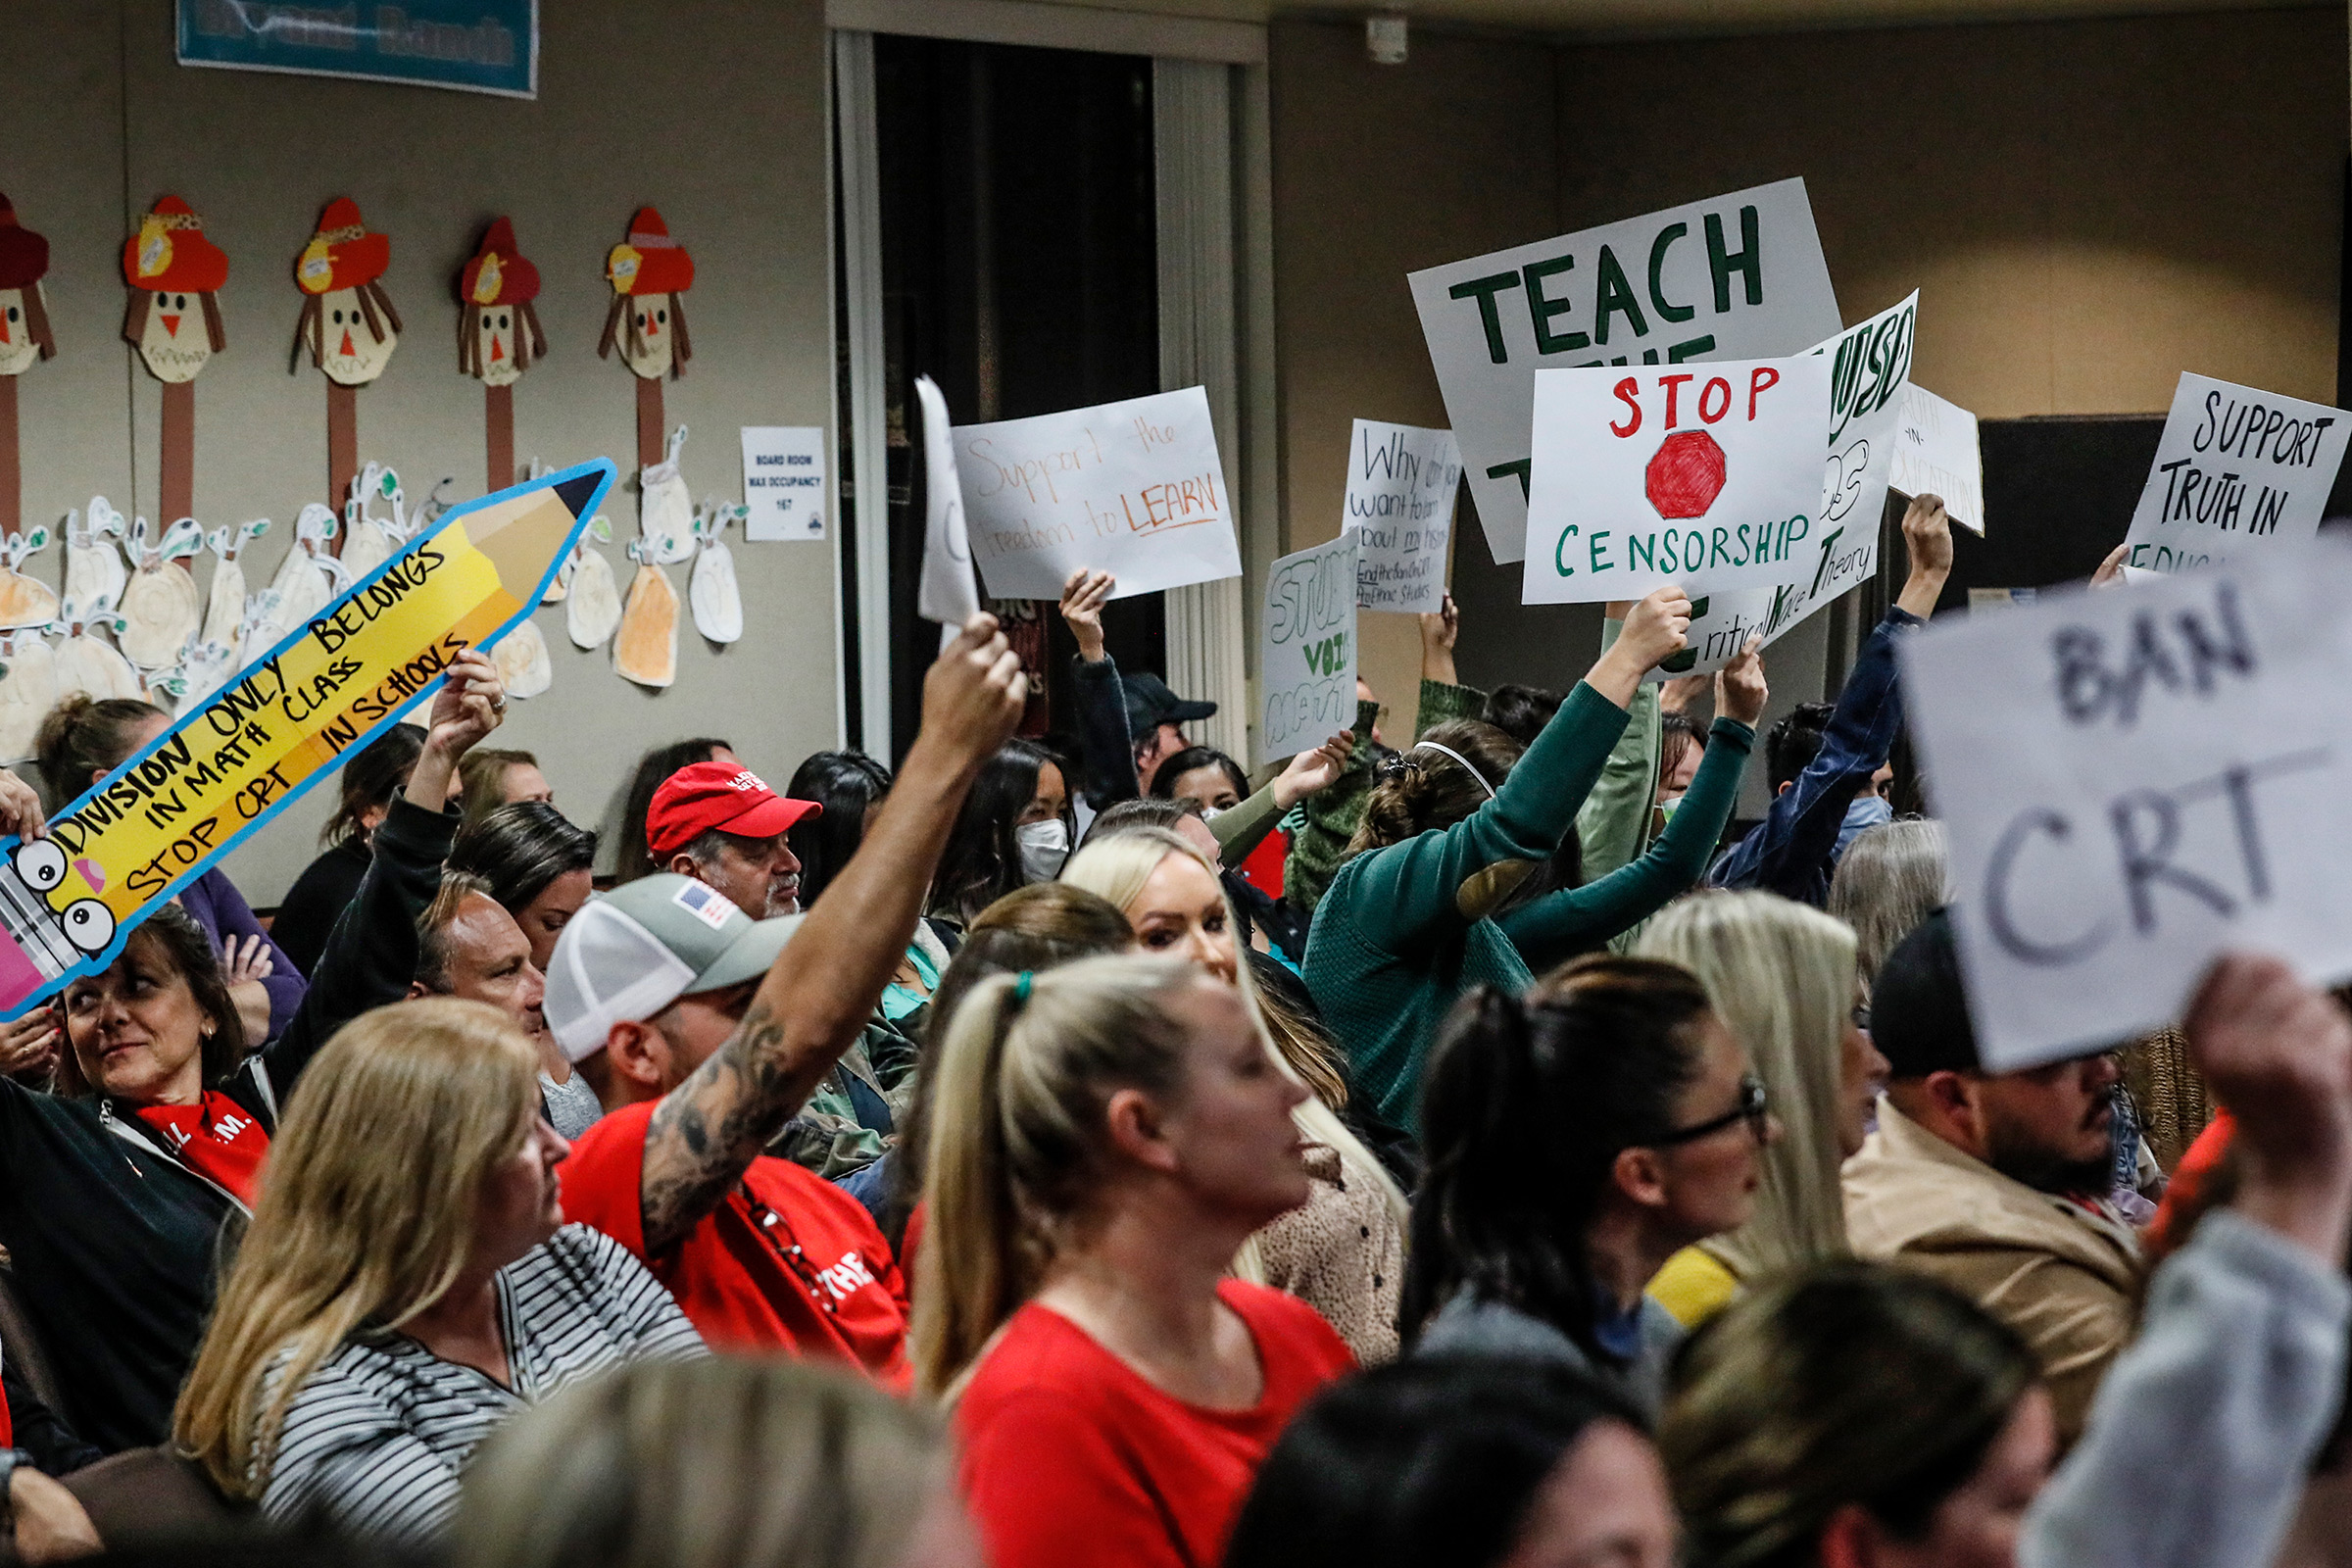 Proponents and opponents to teaching Critical Race Theory are in attendance as the Placentia Yorba Linda School Board discusses a proposed resolution to ban it from being taught in schools, in Yorba Linda, Calif., on Nov. 16, 2021. (Robert Gauthier—Los Angeles Times/Getty Images)